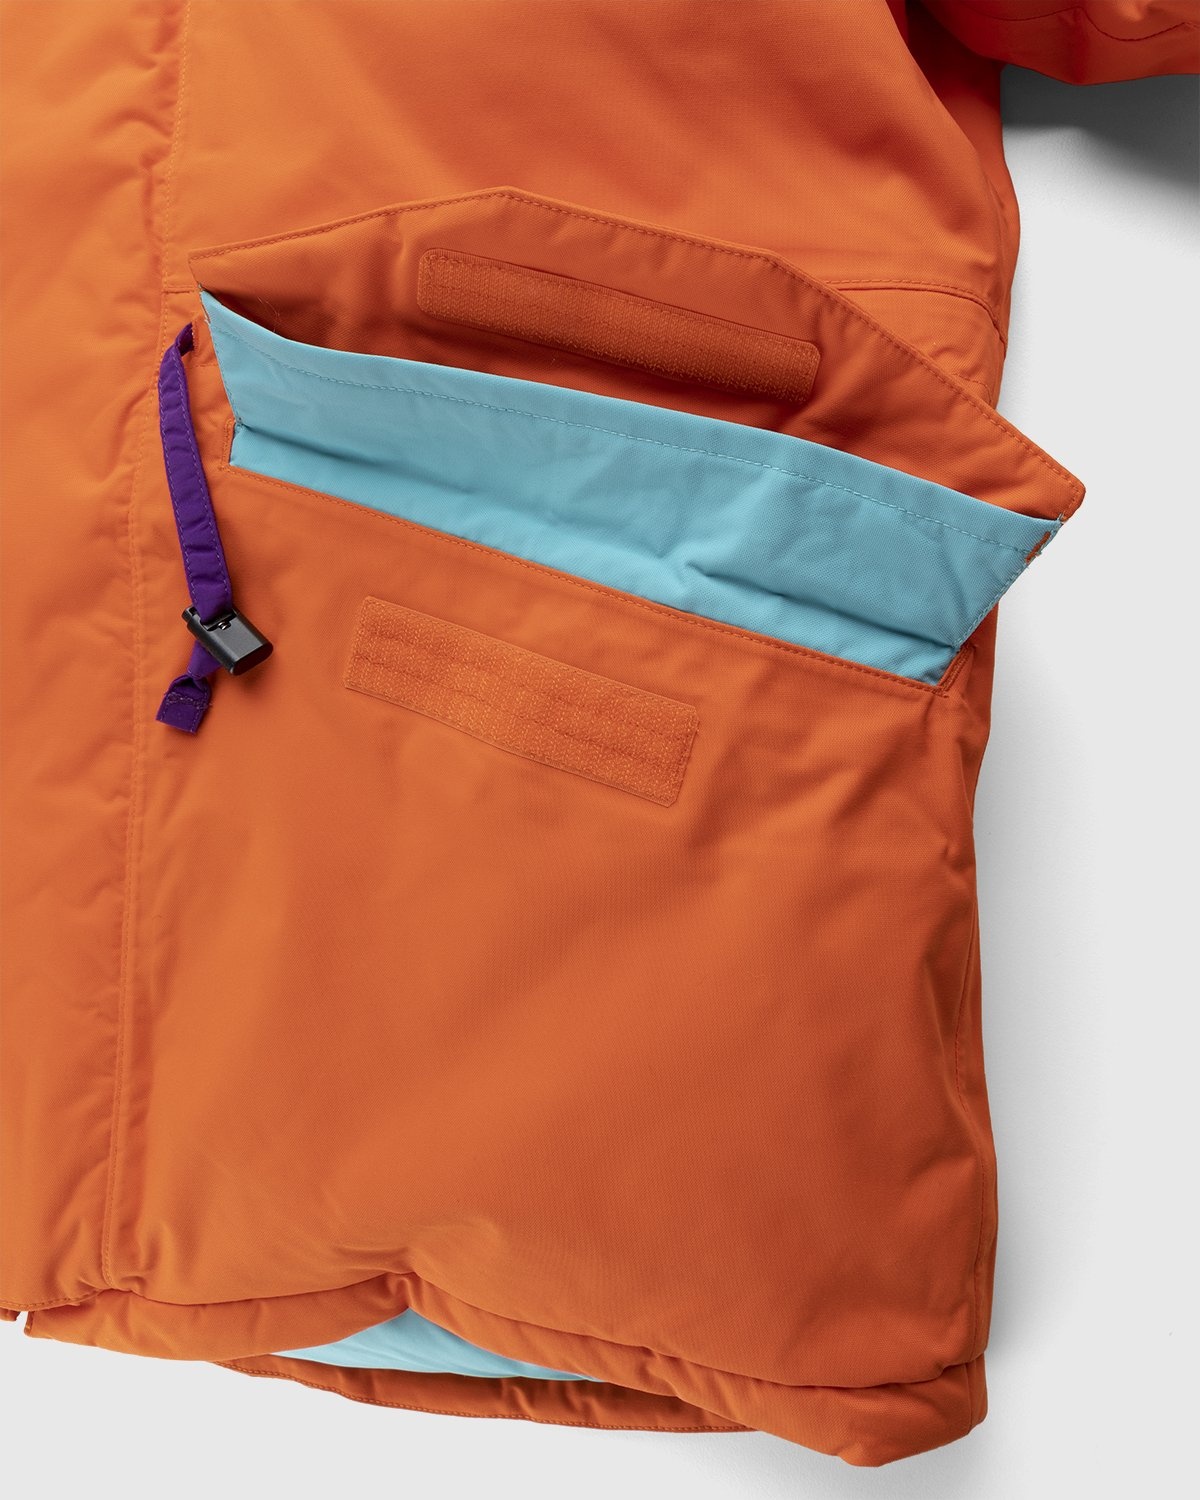 The North Face – Trans Antarctica Expedition Parka Red Orange - Outerwear - Orange - Image 5